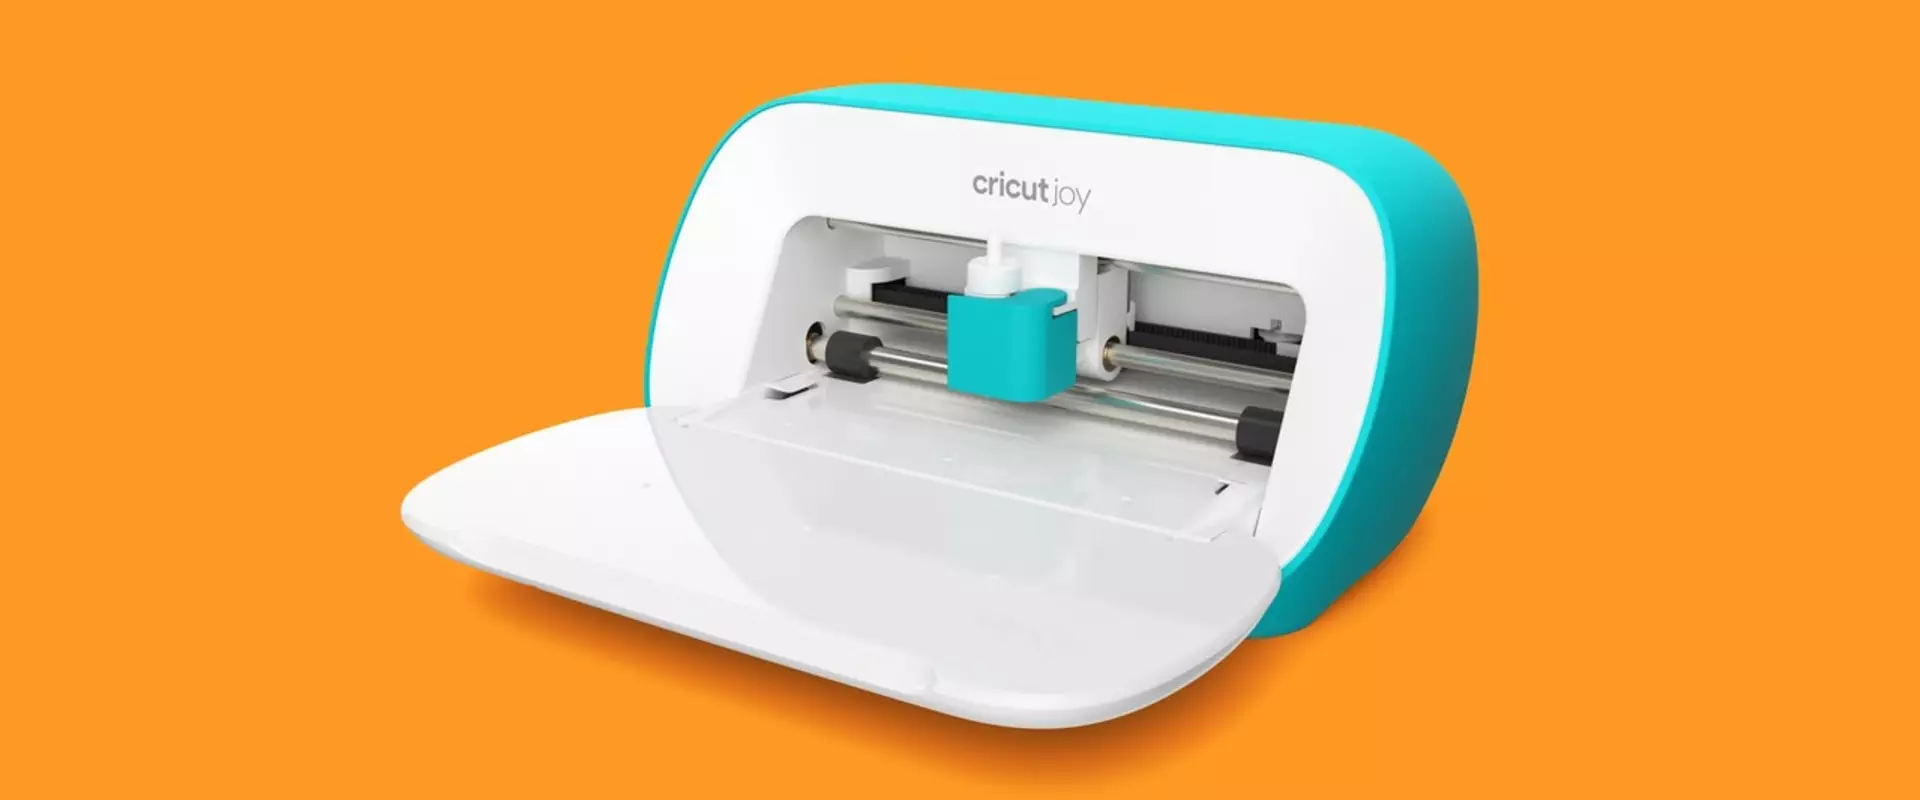 What can you use a cricut for?